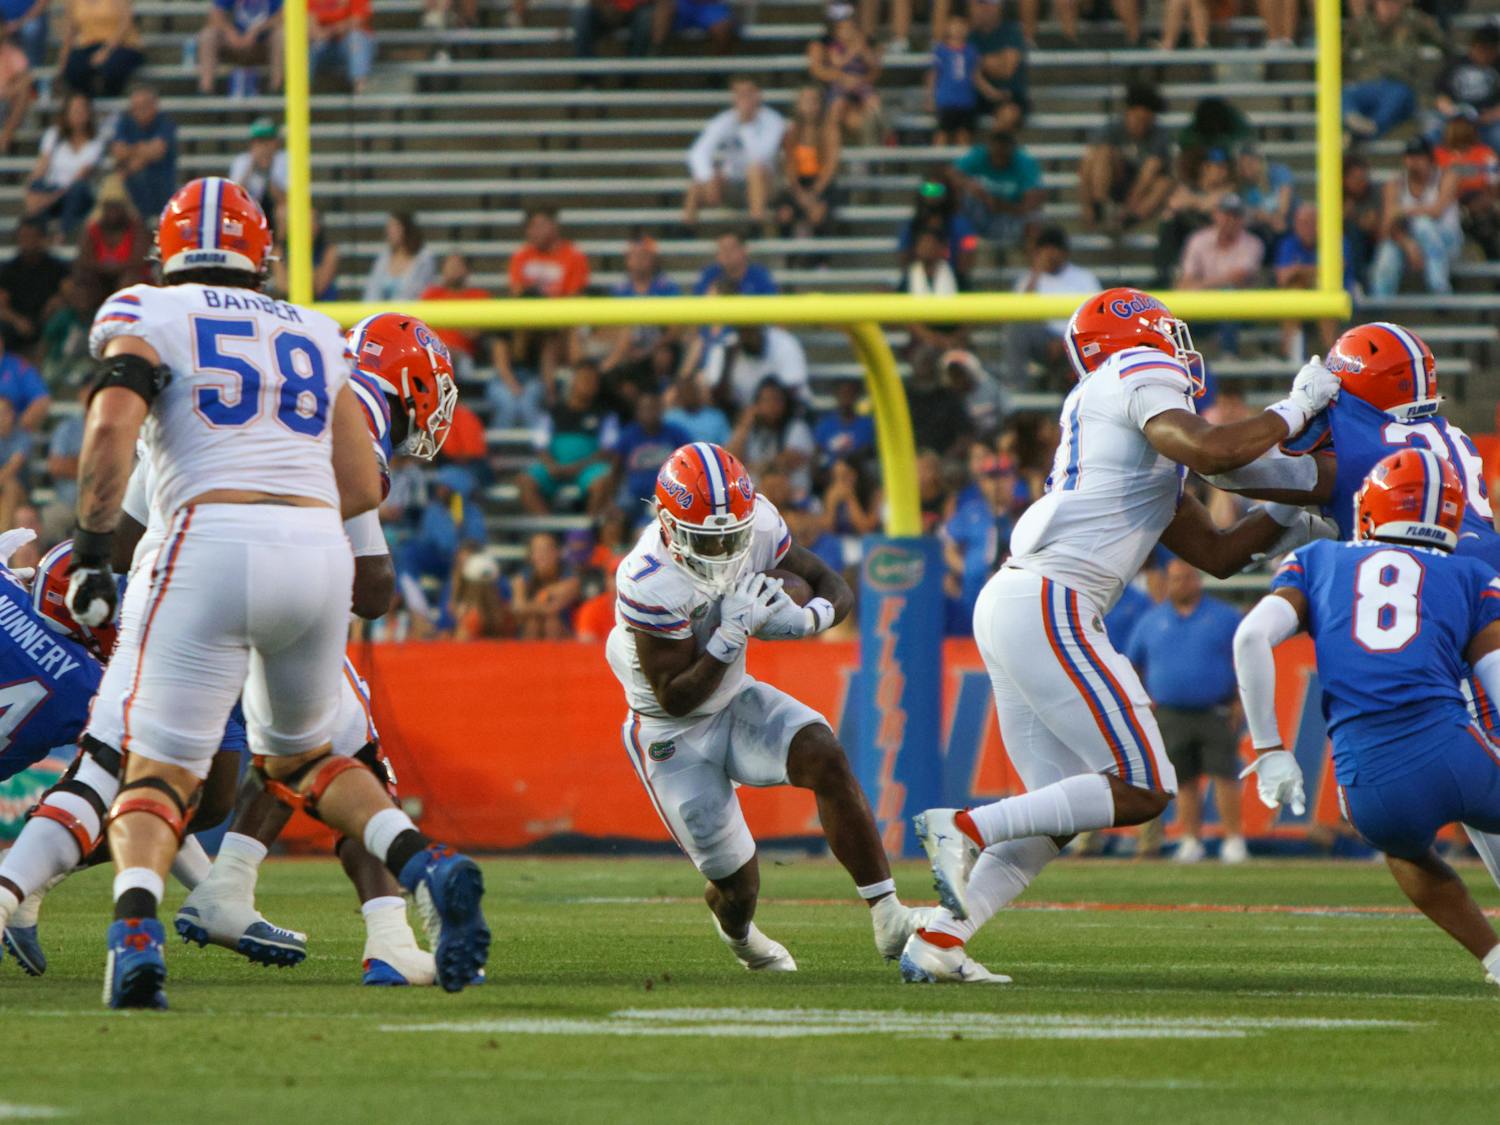 UF's freshmen and transfer portal signees made their debut in the Gators' Spring game.